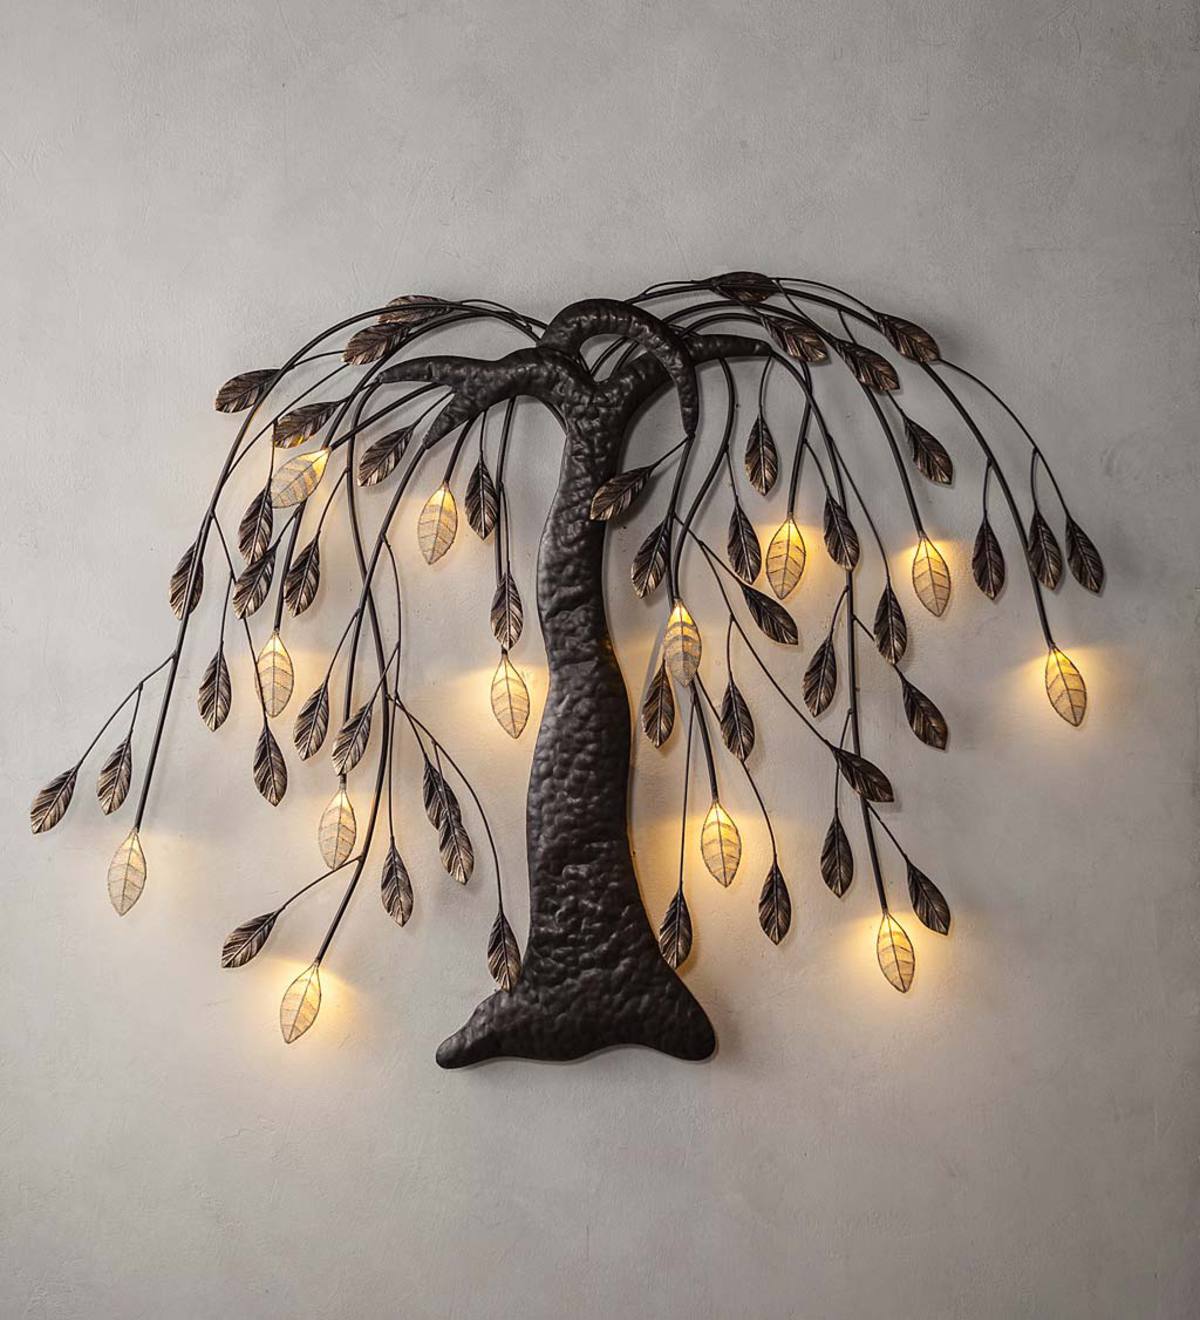 Lighted Willow Tree Wall Art PlowHearth